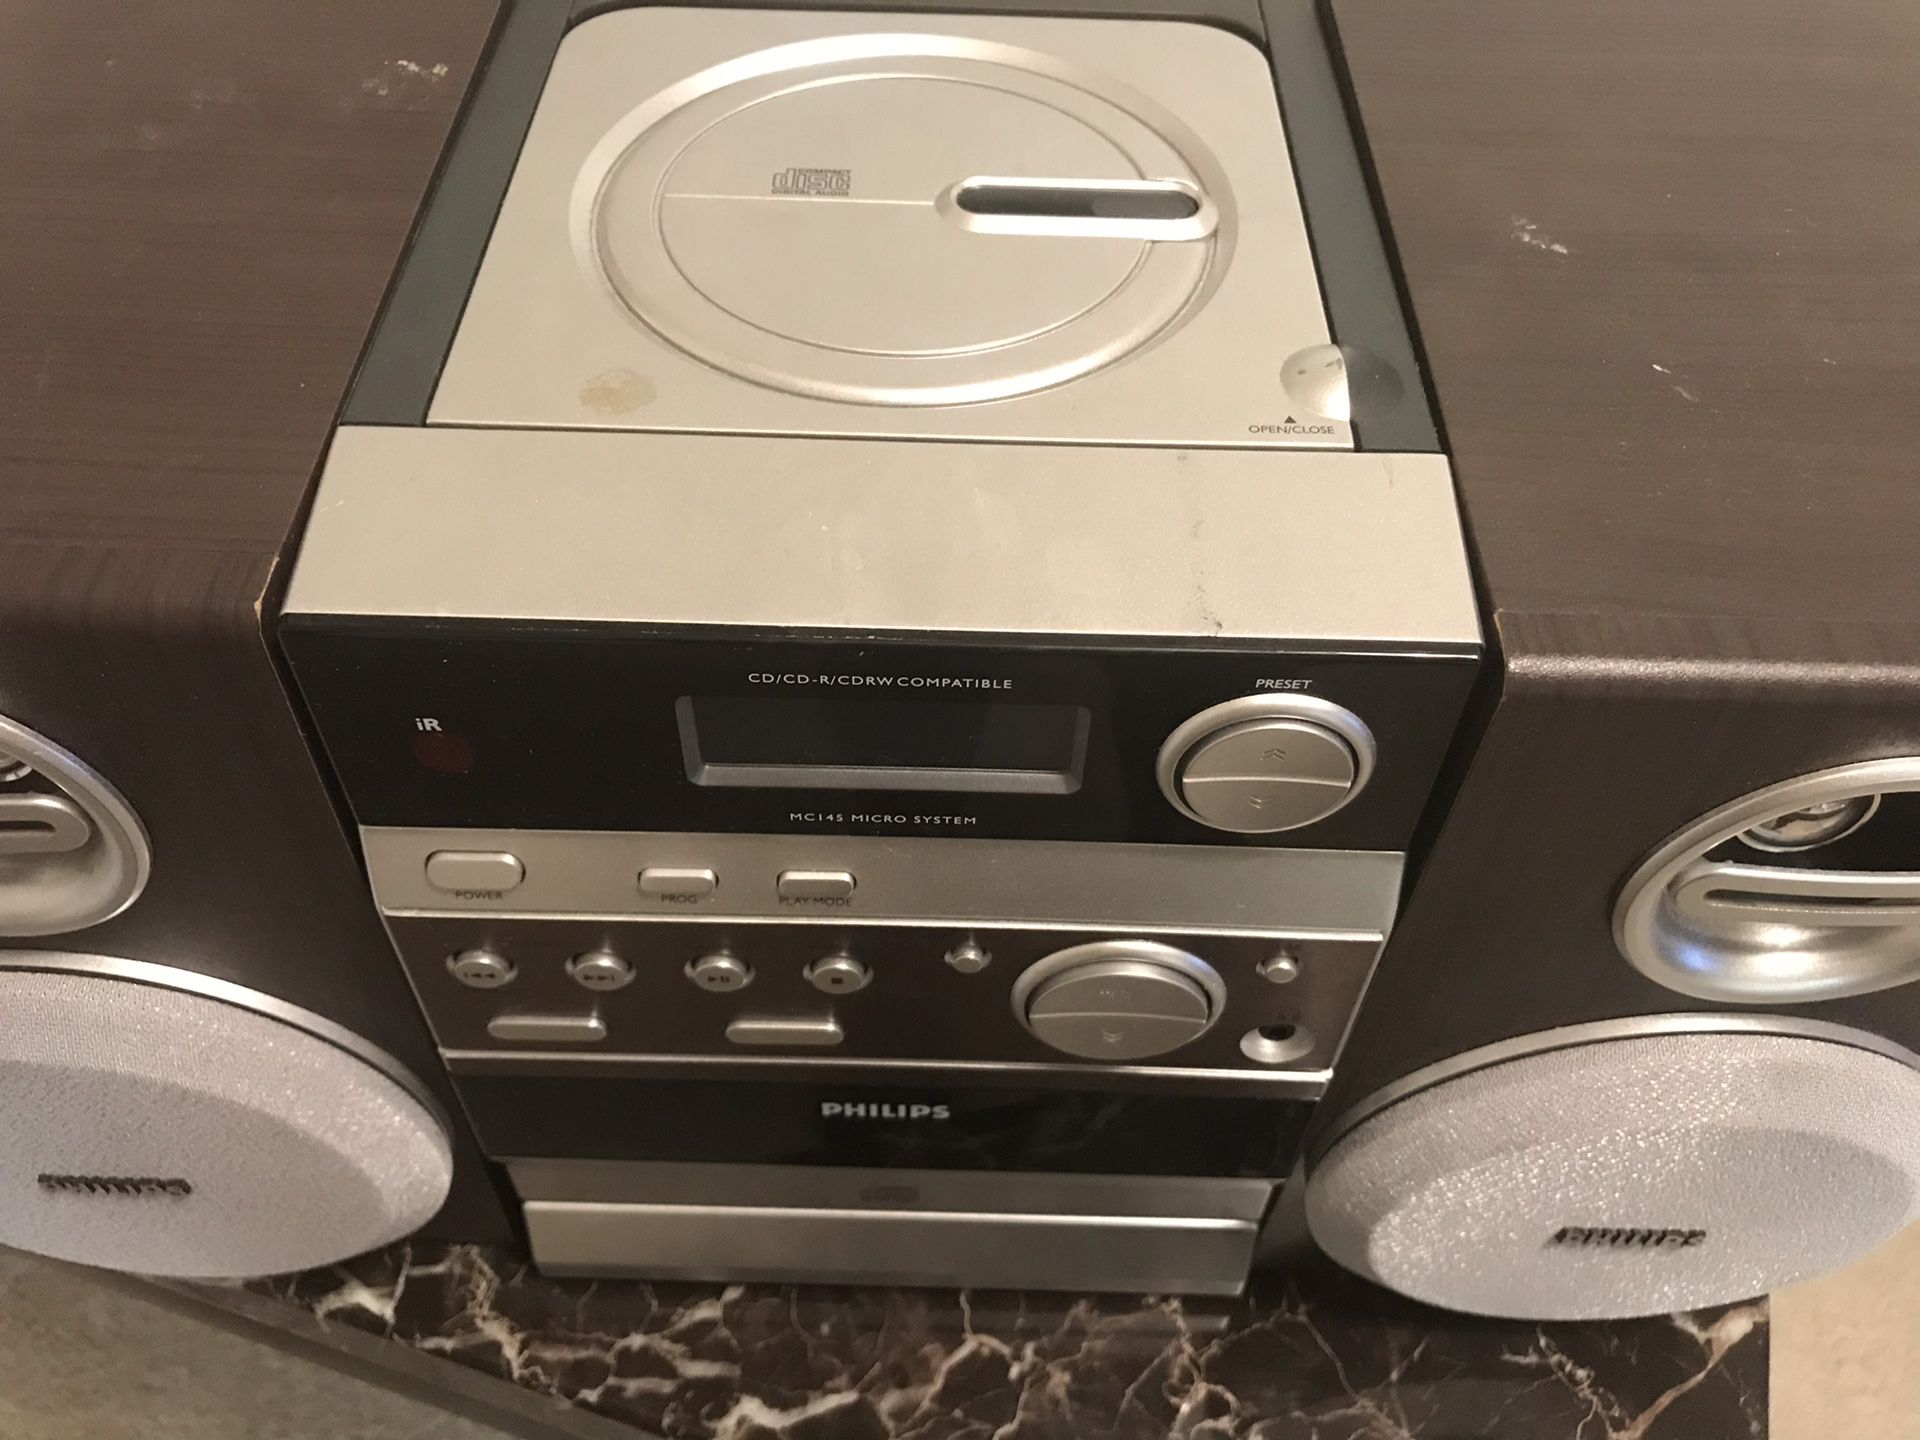 Phillips Stereo music system